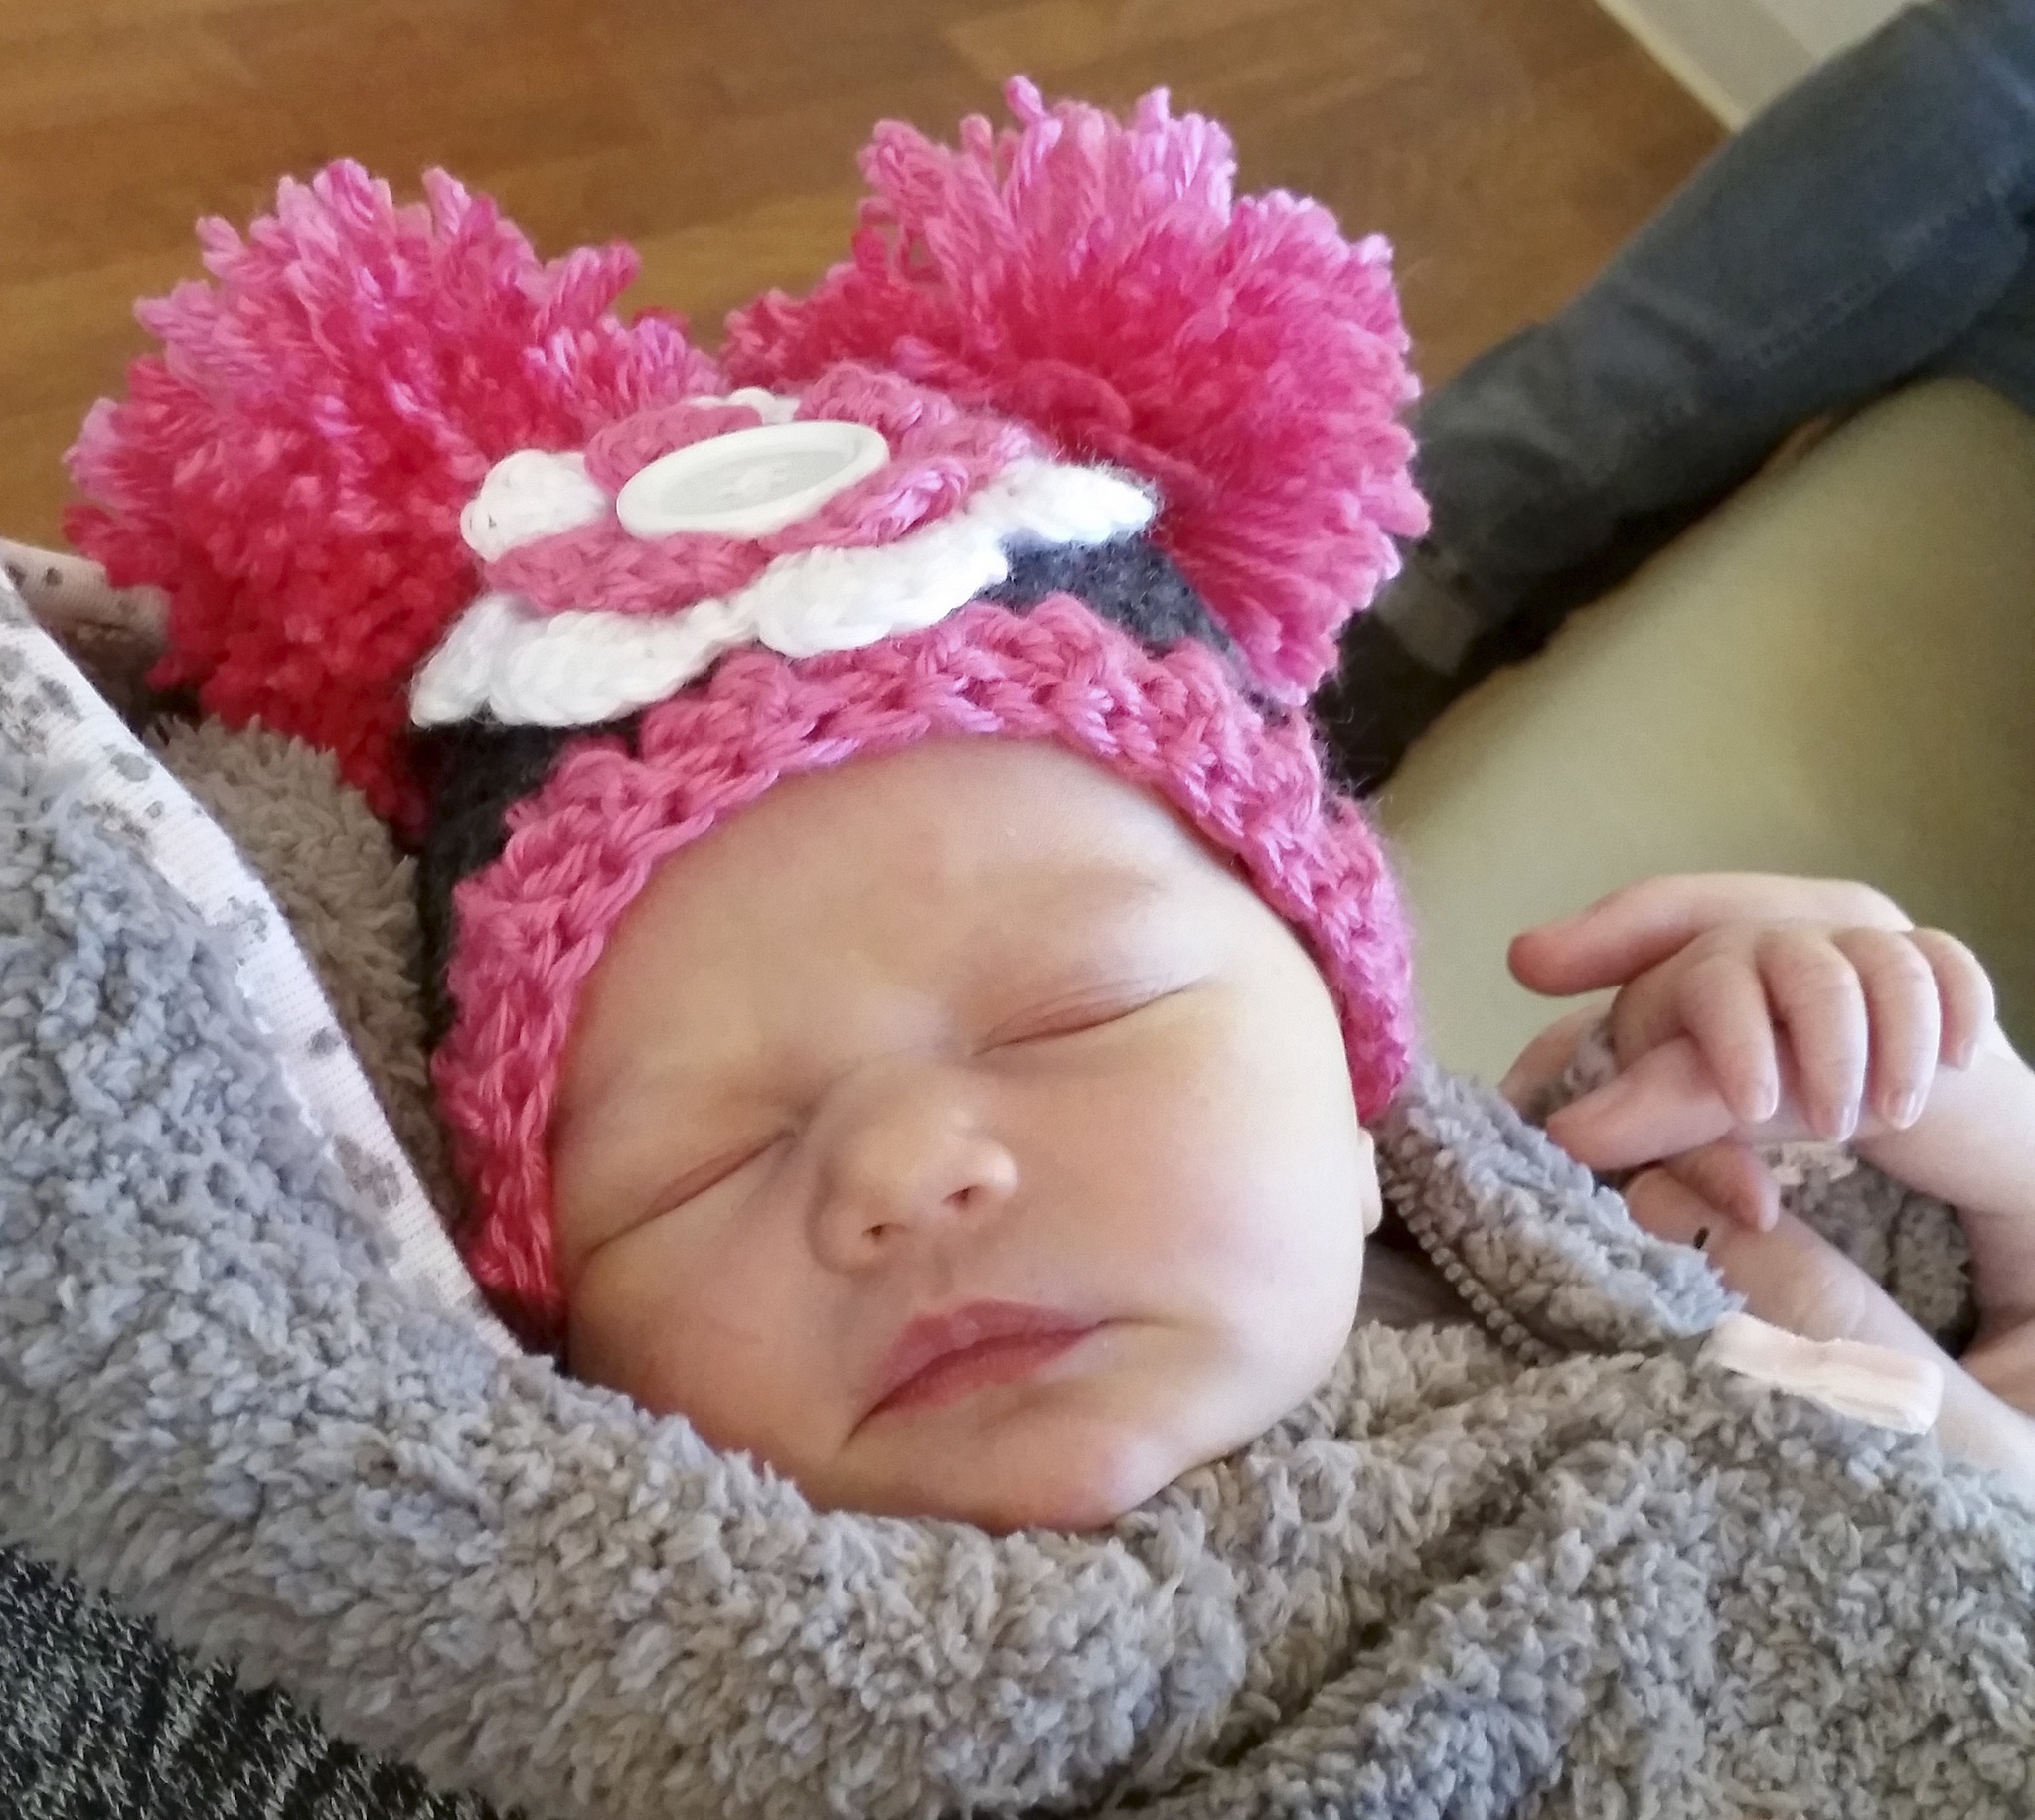 Newborns bring new year cheer to Whidbey families